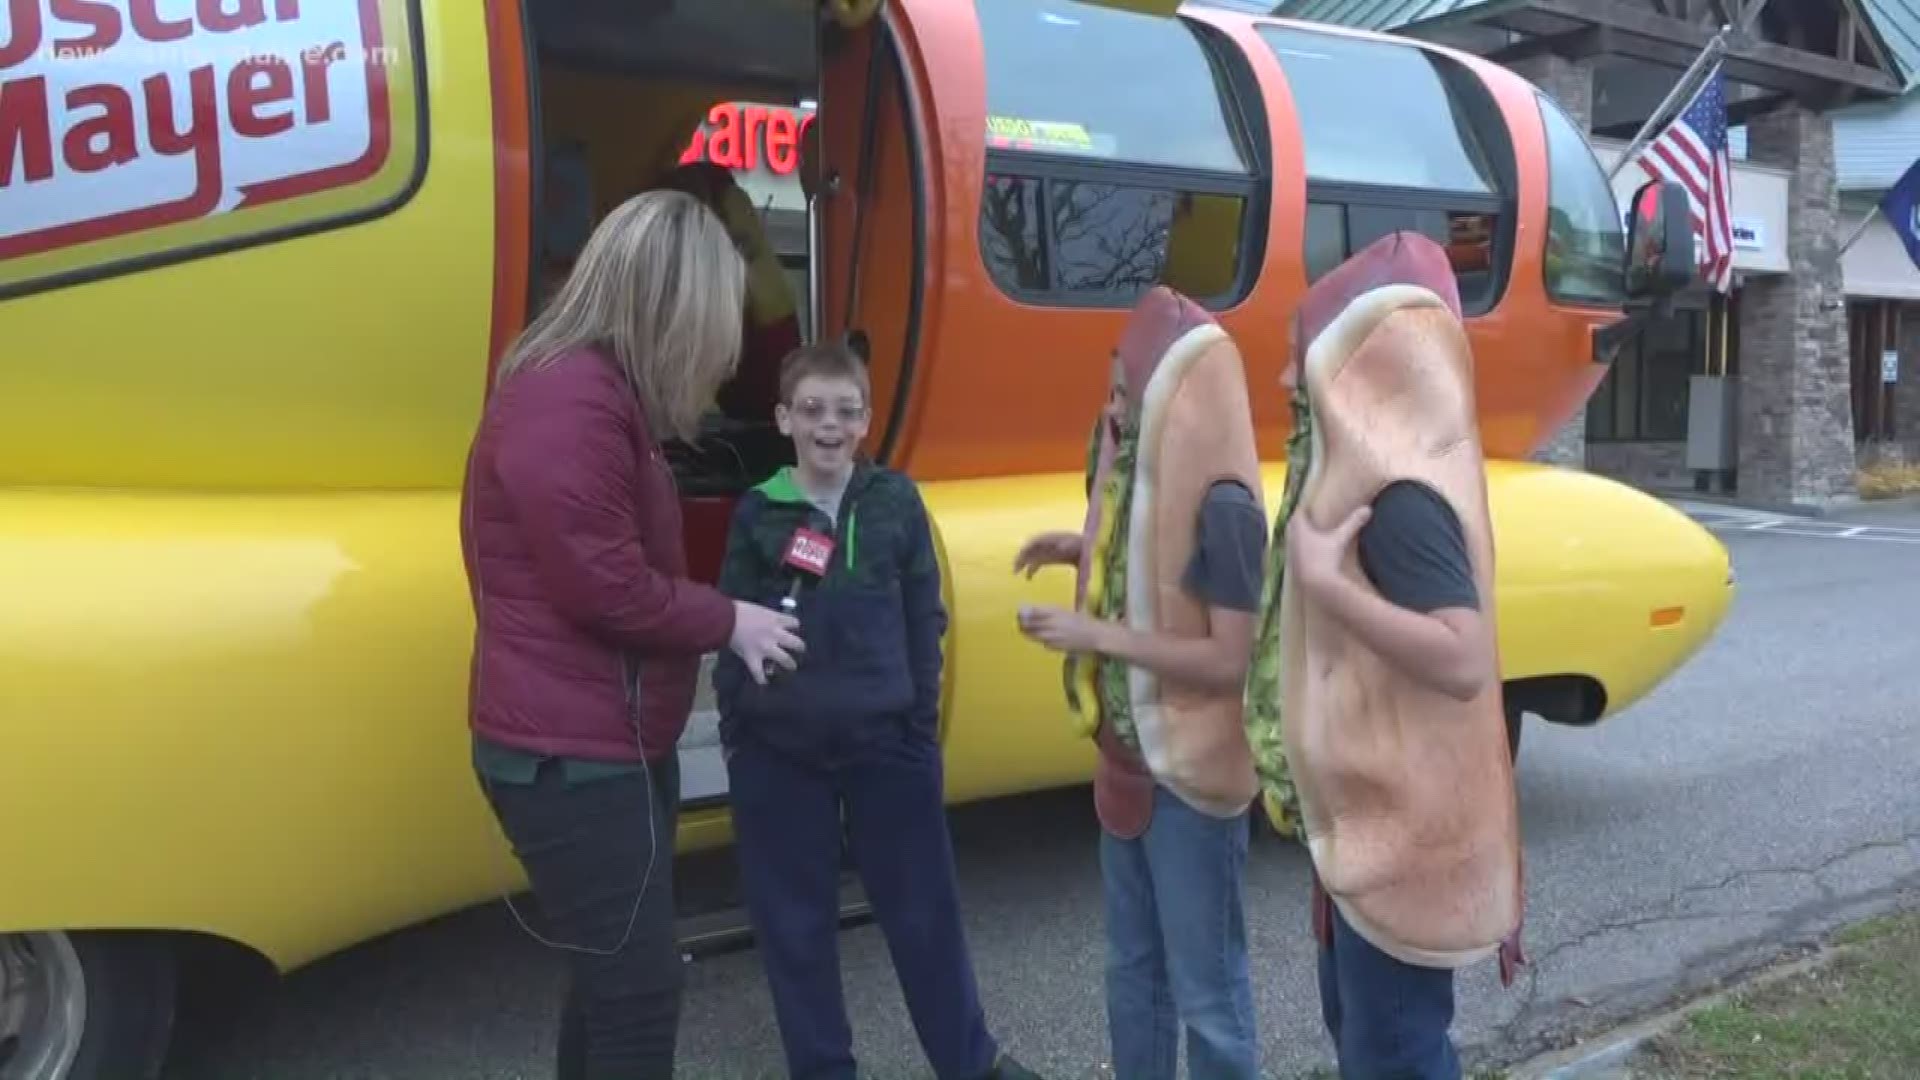 Kid dresses up as hot dog in school picture, gets surprise visit from Oscar Mayer